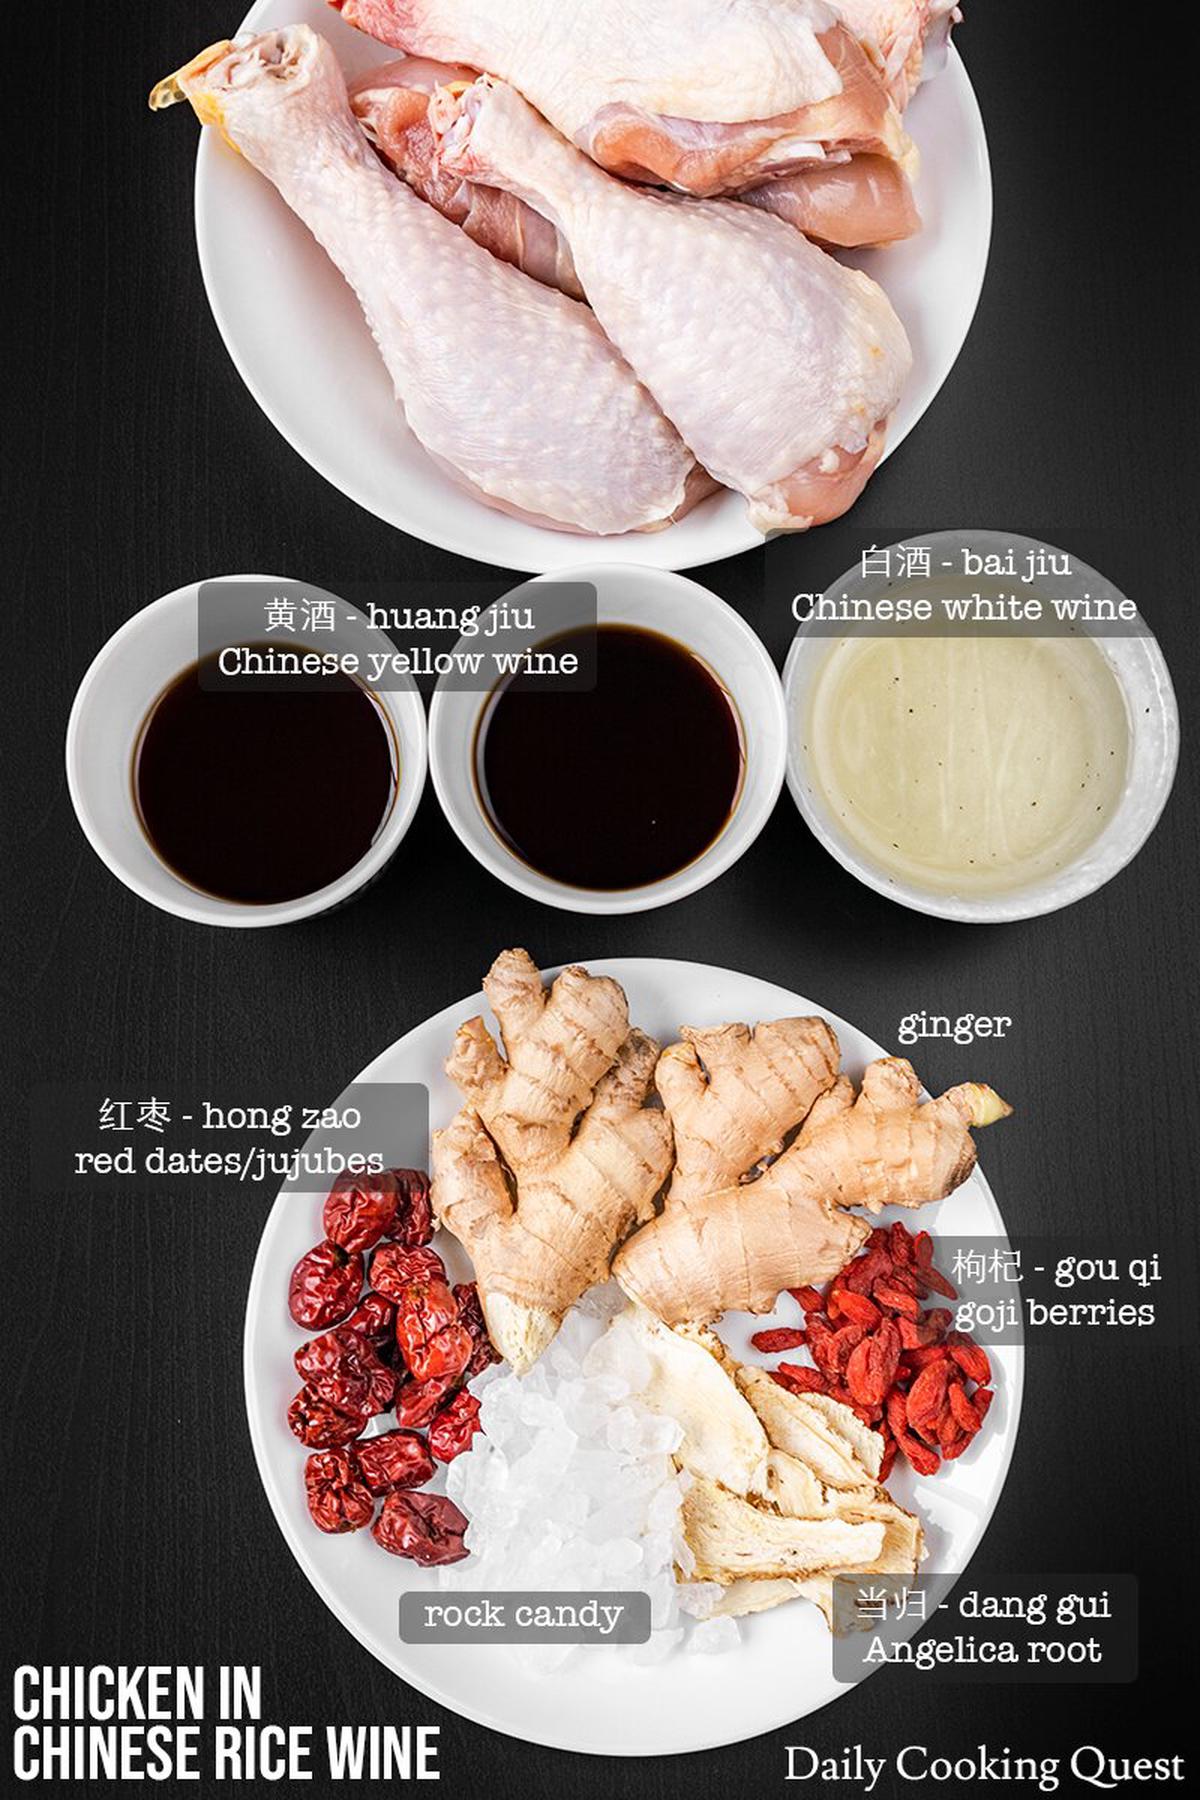 Ingredients to prepare chicken in Chinese rice wine: chicken, Chinese yellow rice wine, Chinese white rice wine, ginger, red dates, goji berries, Angelica root, and rock candy.